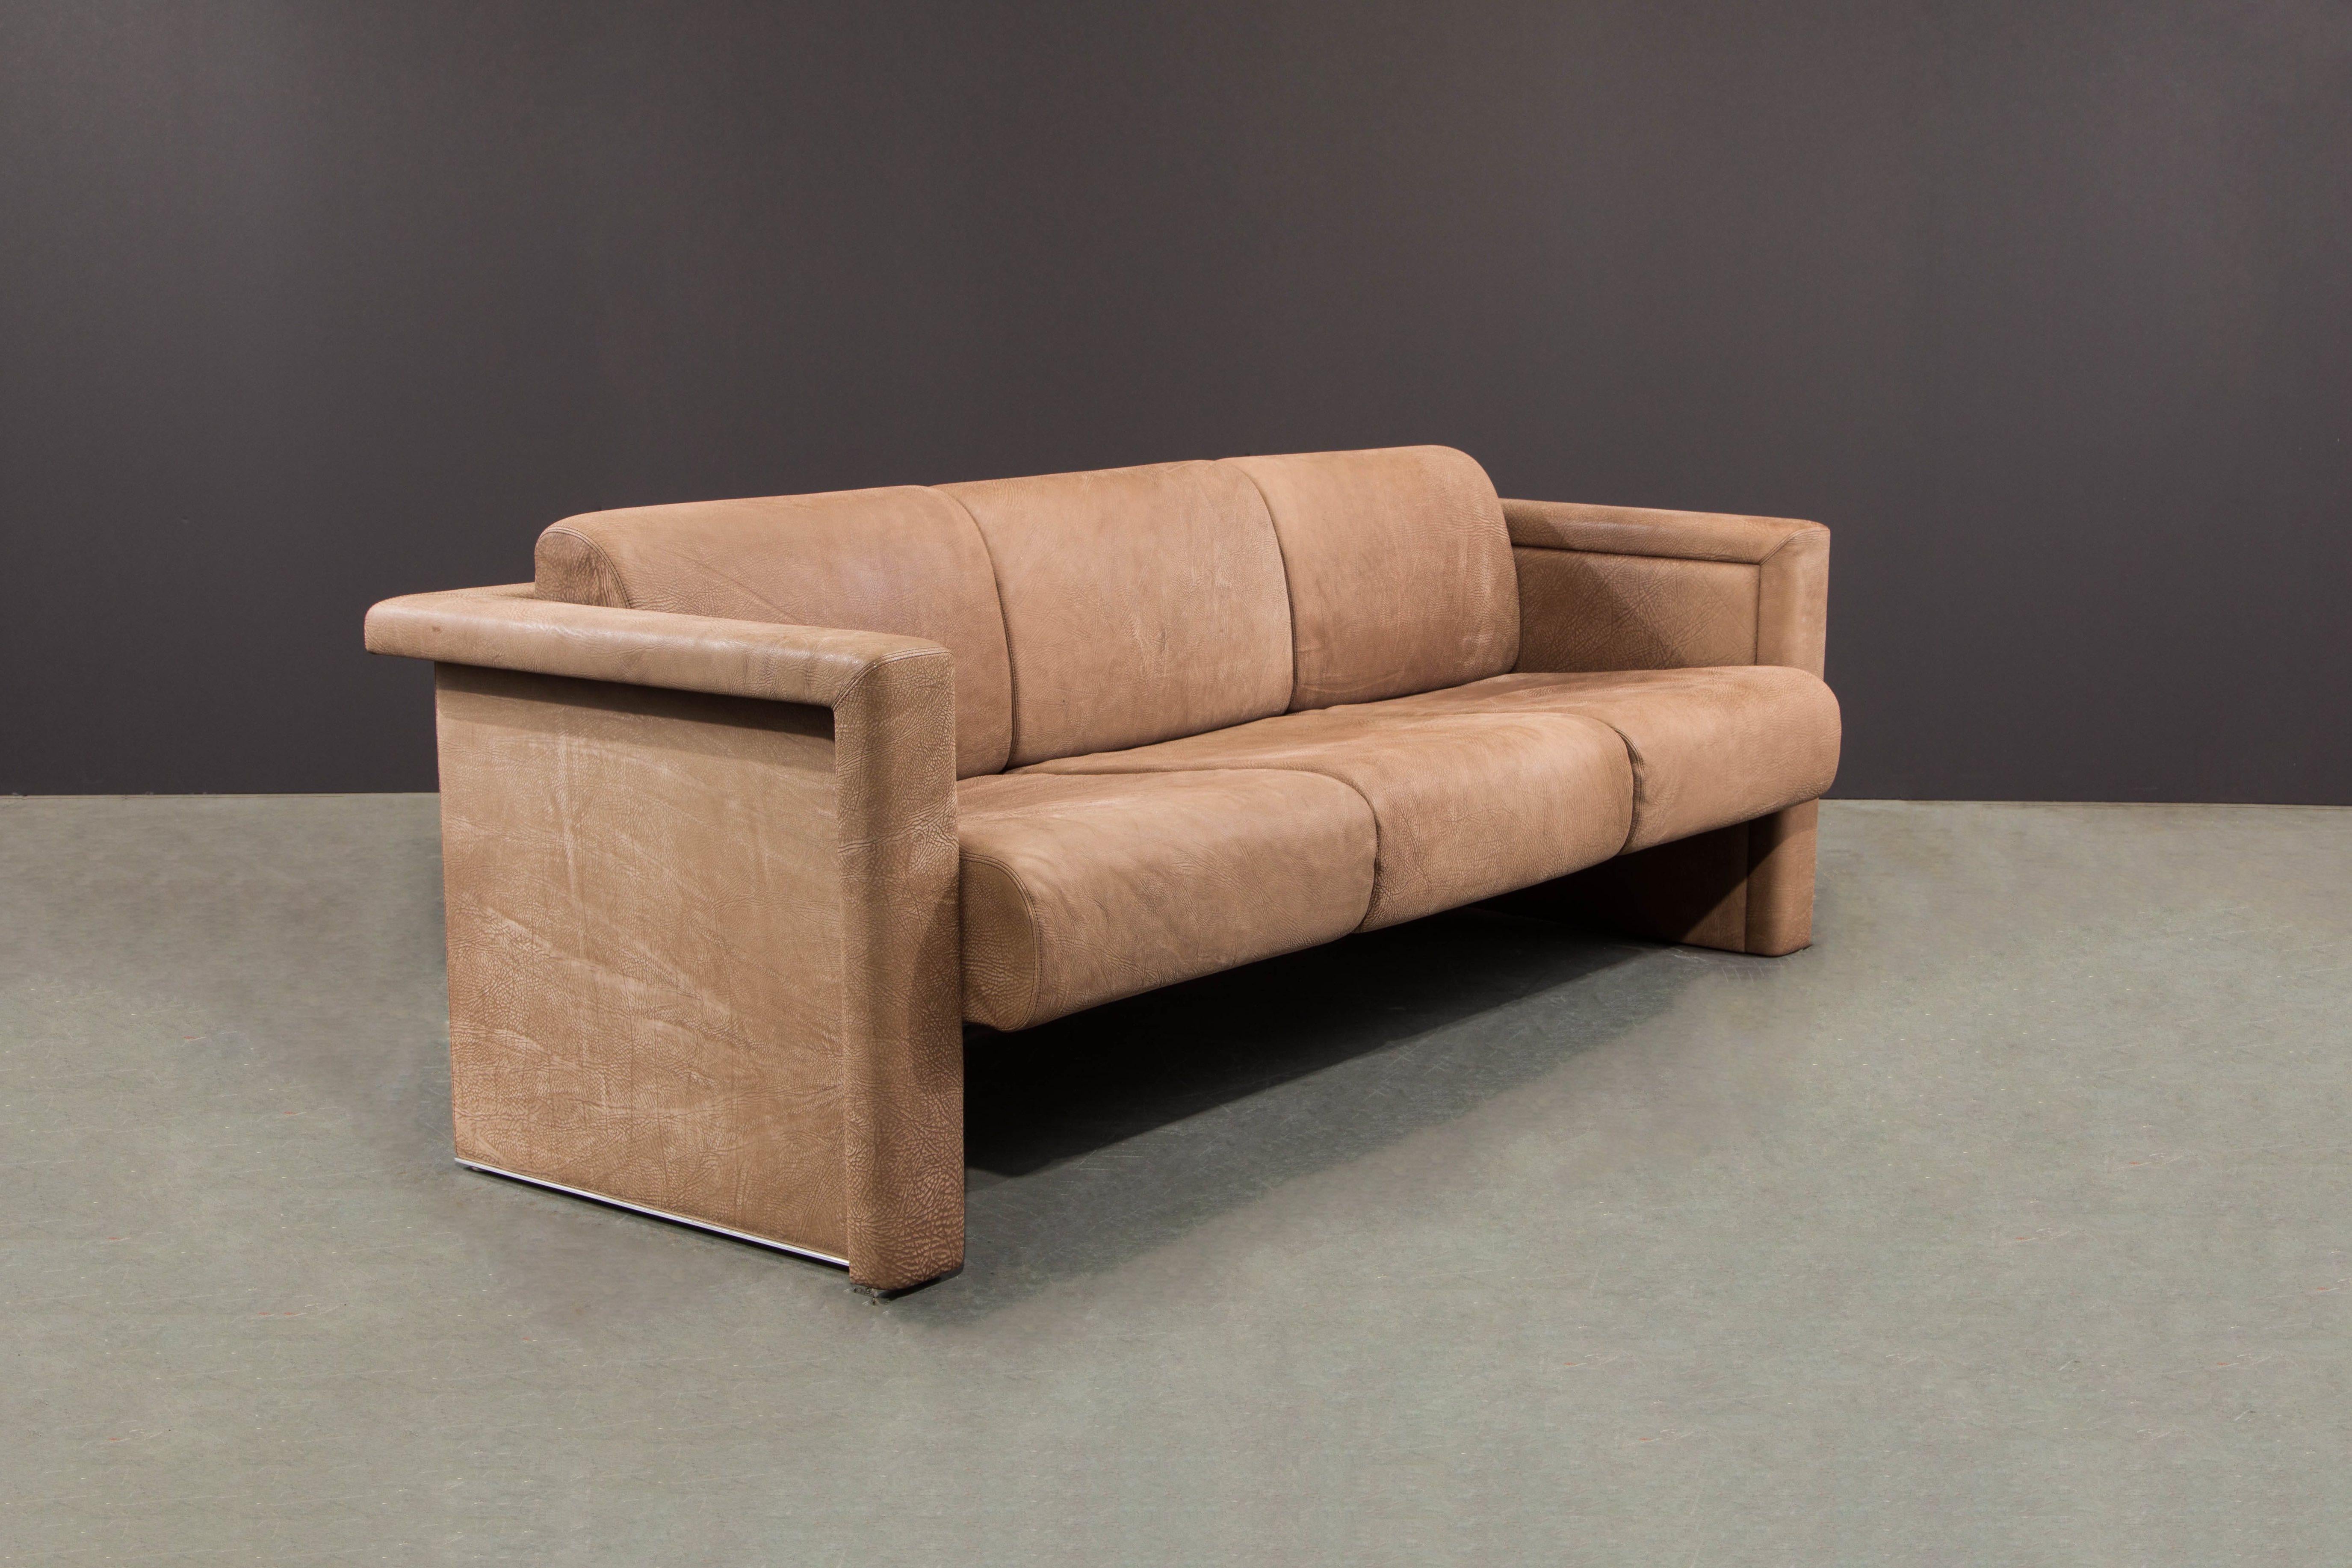 Italian Buffalo Leather Sofa by Robert and Trix Haussmann for Knoll, c. 1988, Signed For Sale